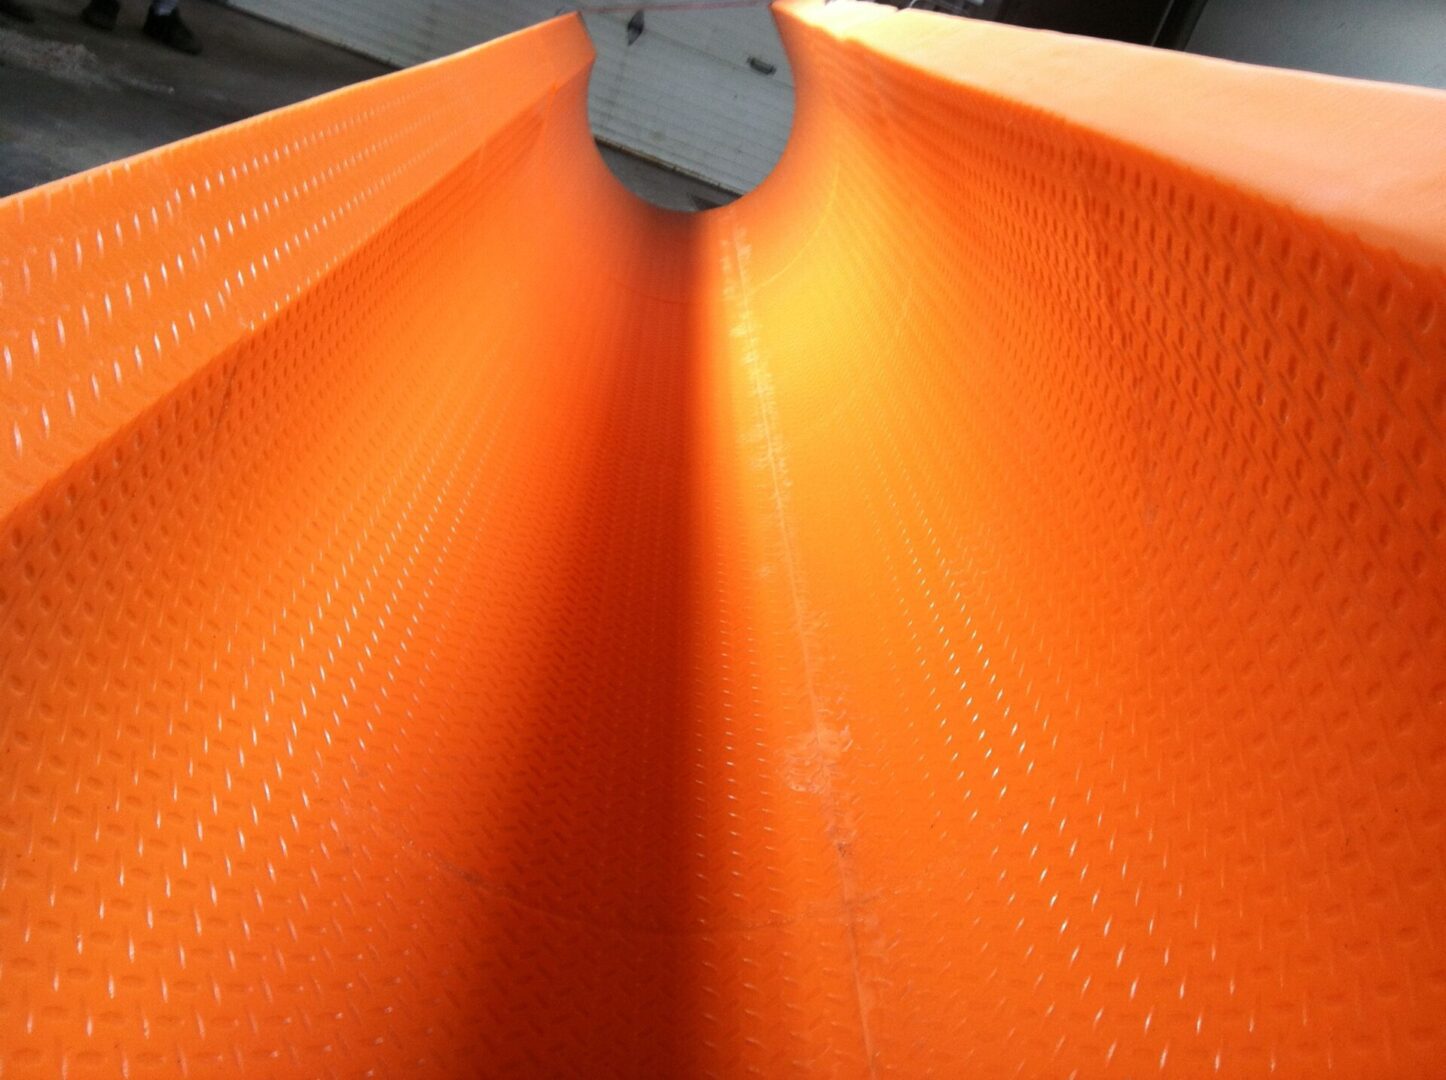 A close up of an orange tube with a white object in it